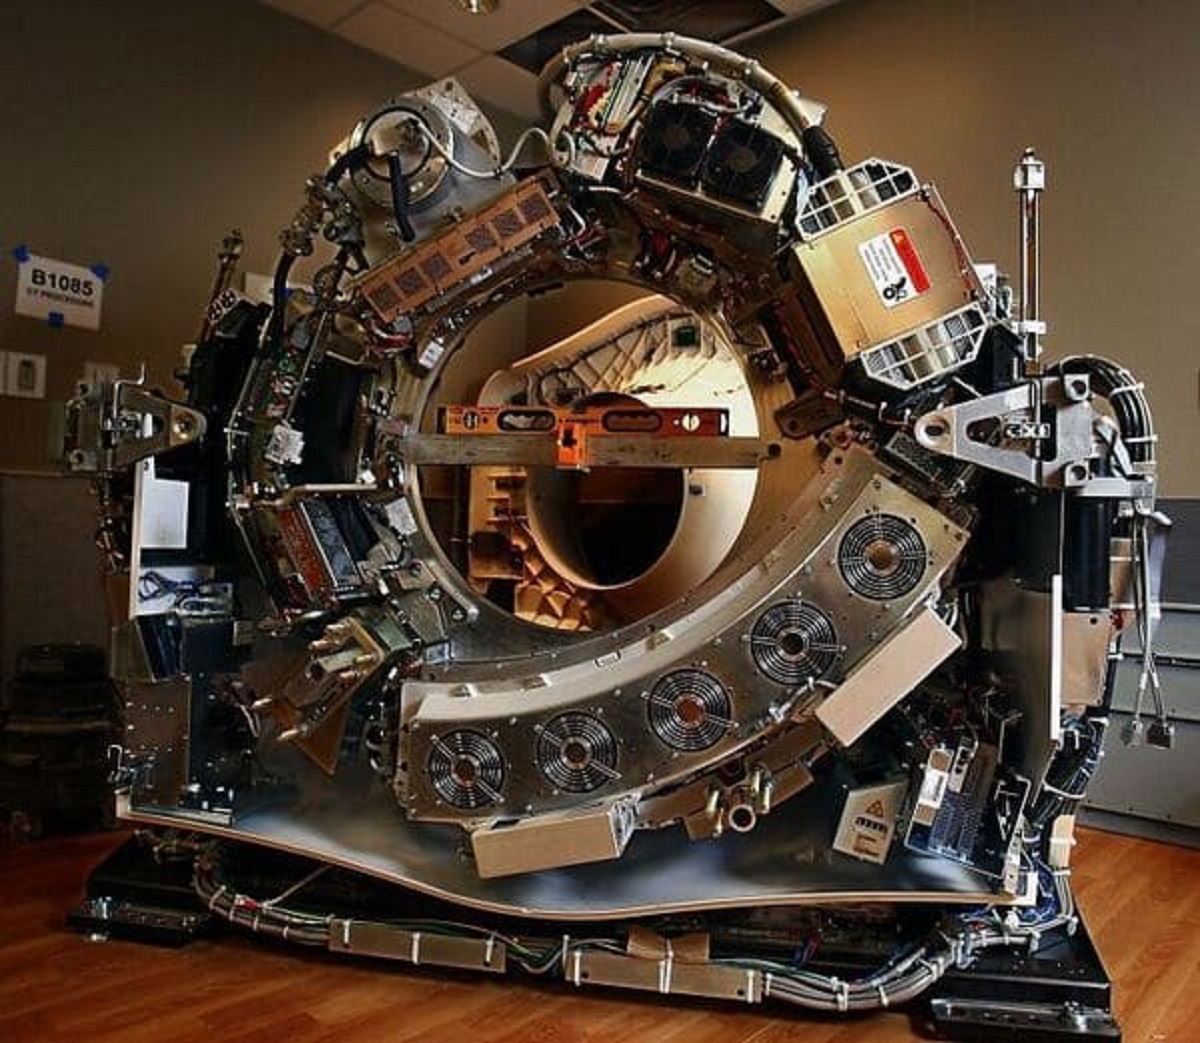 “Have You Ever Wondered What A CT Scanner Looks Like Without The Cover On It”